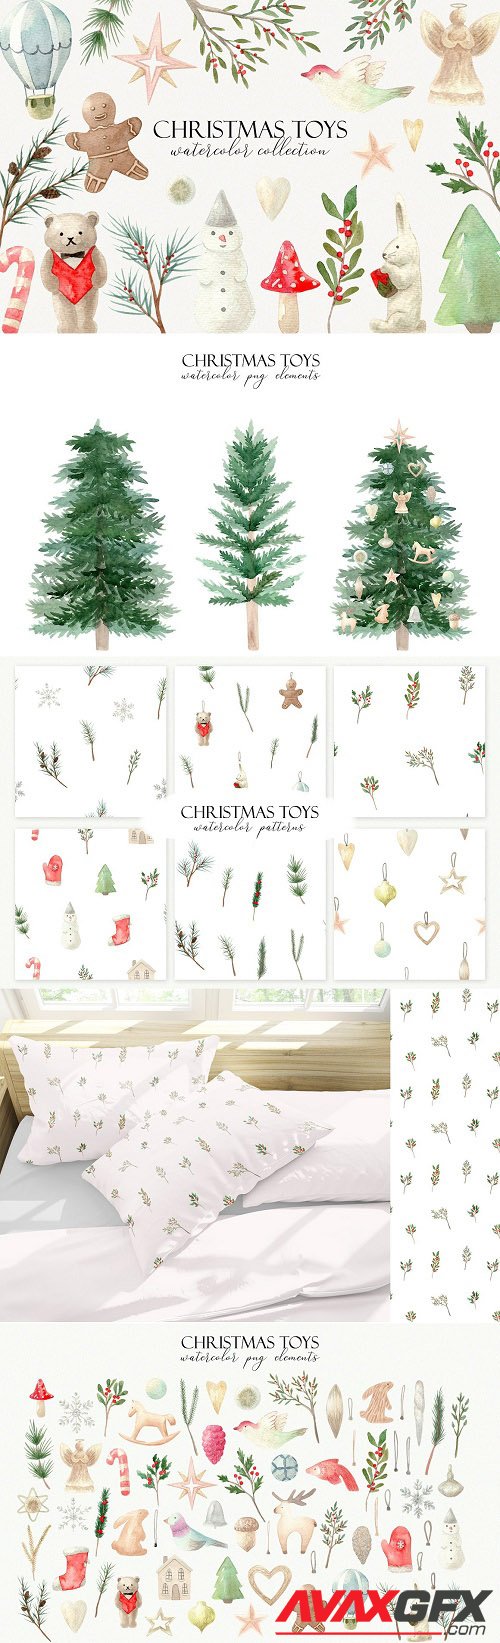 Watercolor Christmas Toys Collection - 6322386